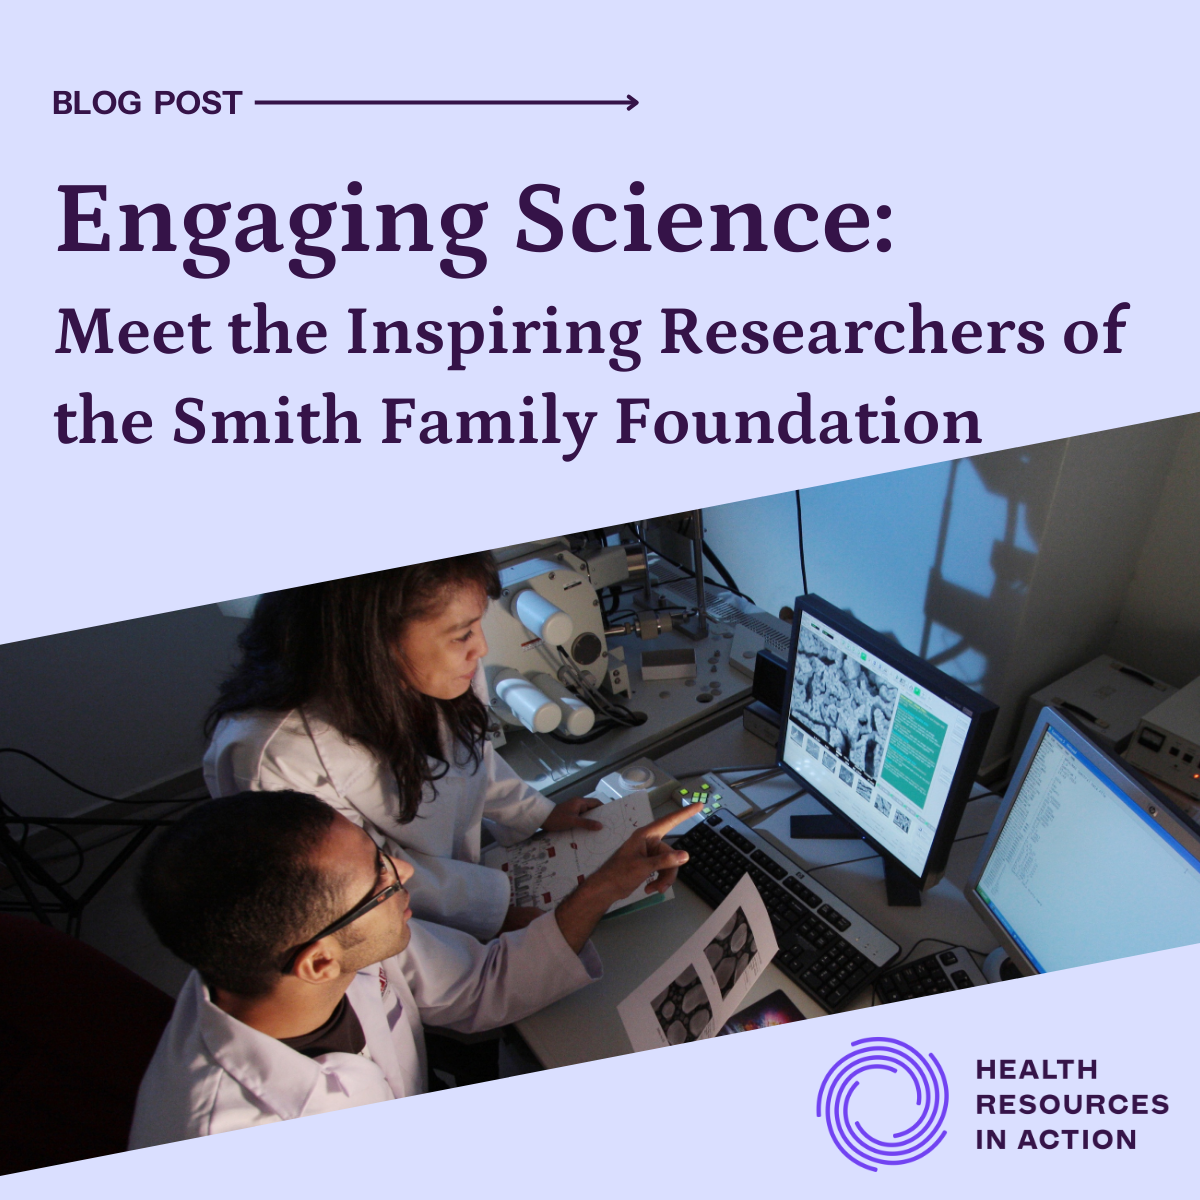 Purple box with inlaid image of two researchers looking at a computer screen, with text: Blog post - Engaging Science: Meet the Inspiring Researchers of the Smith Family Foundation. By .